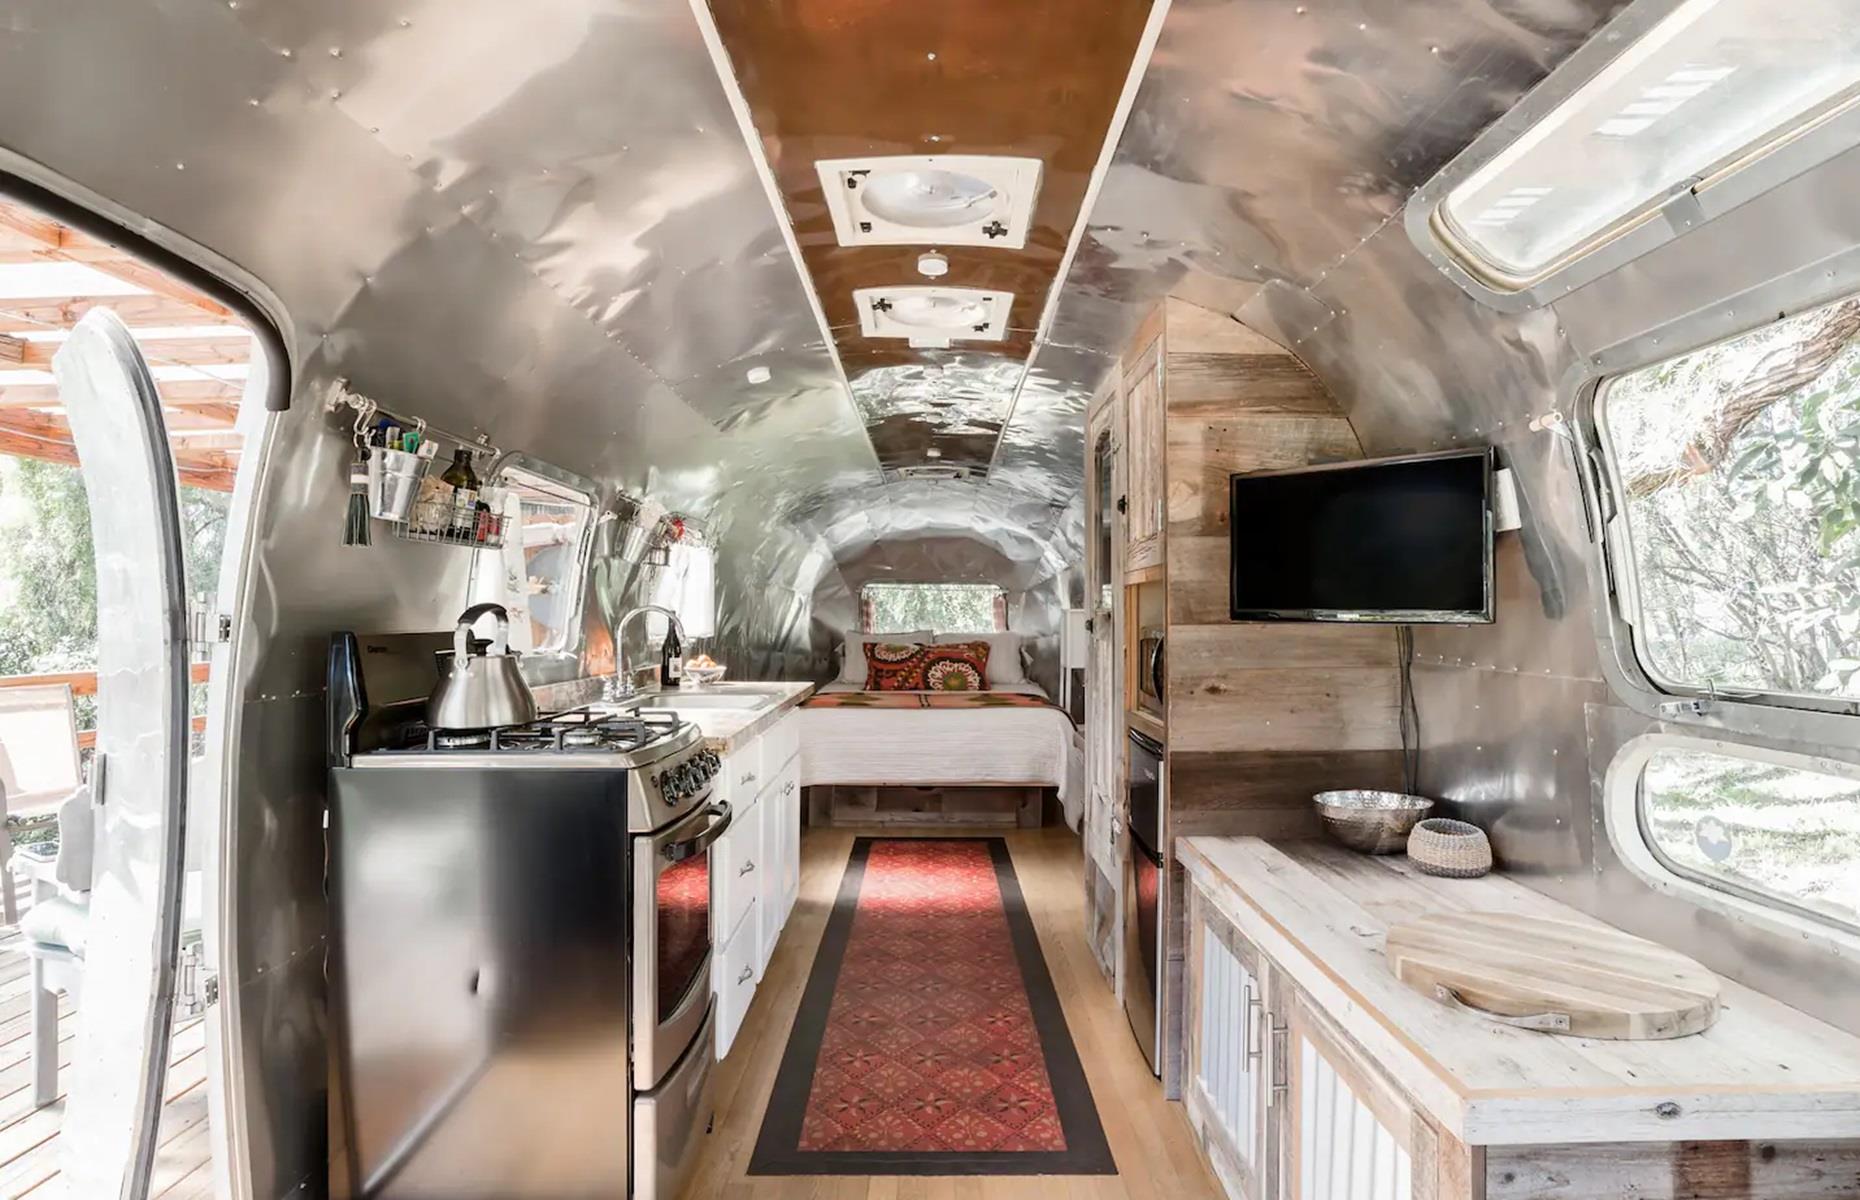 <p>Delia wanted her guests to be able to climb out on either side, so had to have the bed created to fit the Airstream's measurements. The space is lit by a vintage wall sconce, while the closet was made from a 100-year-old piece of wood from Connecticut, which Delia's friend donated to her.</p>  <p>Outside, there's a covered deck, where people can relax and soak up the stars, as well as an amazing outdoor bathroom formed from timber, corrugated aluminum and plumbing parts.</p>